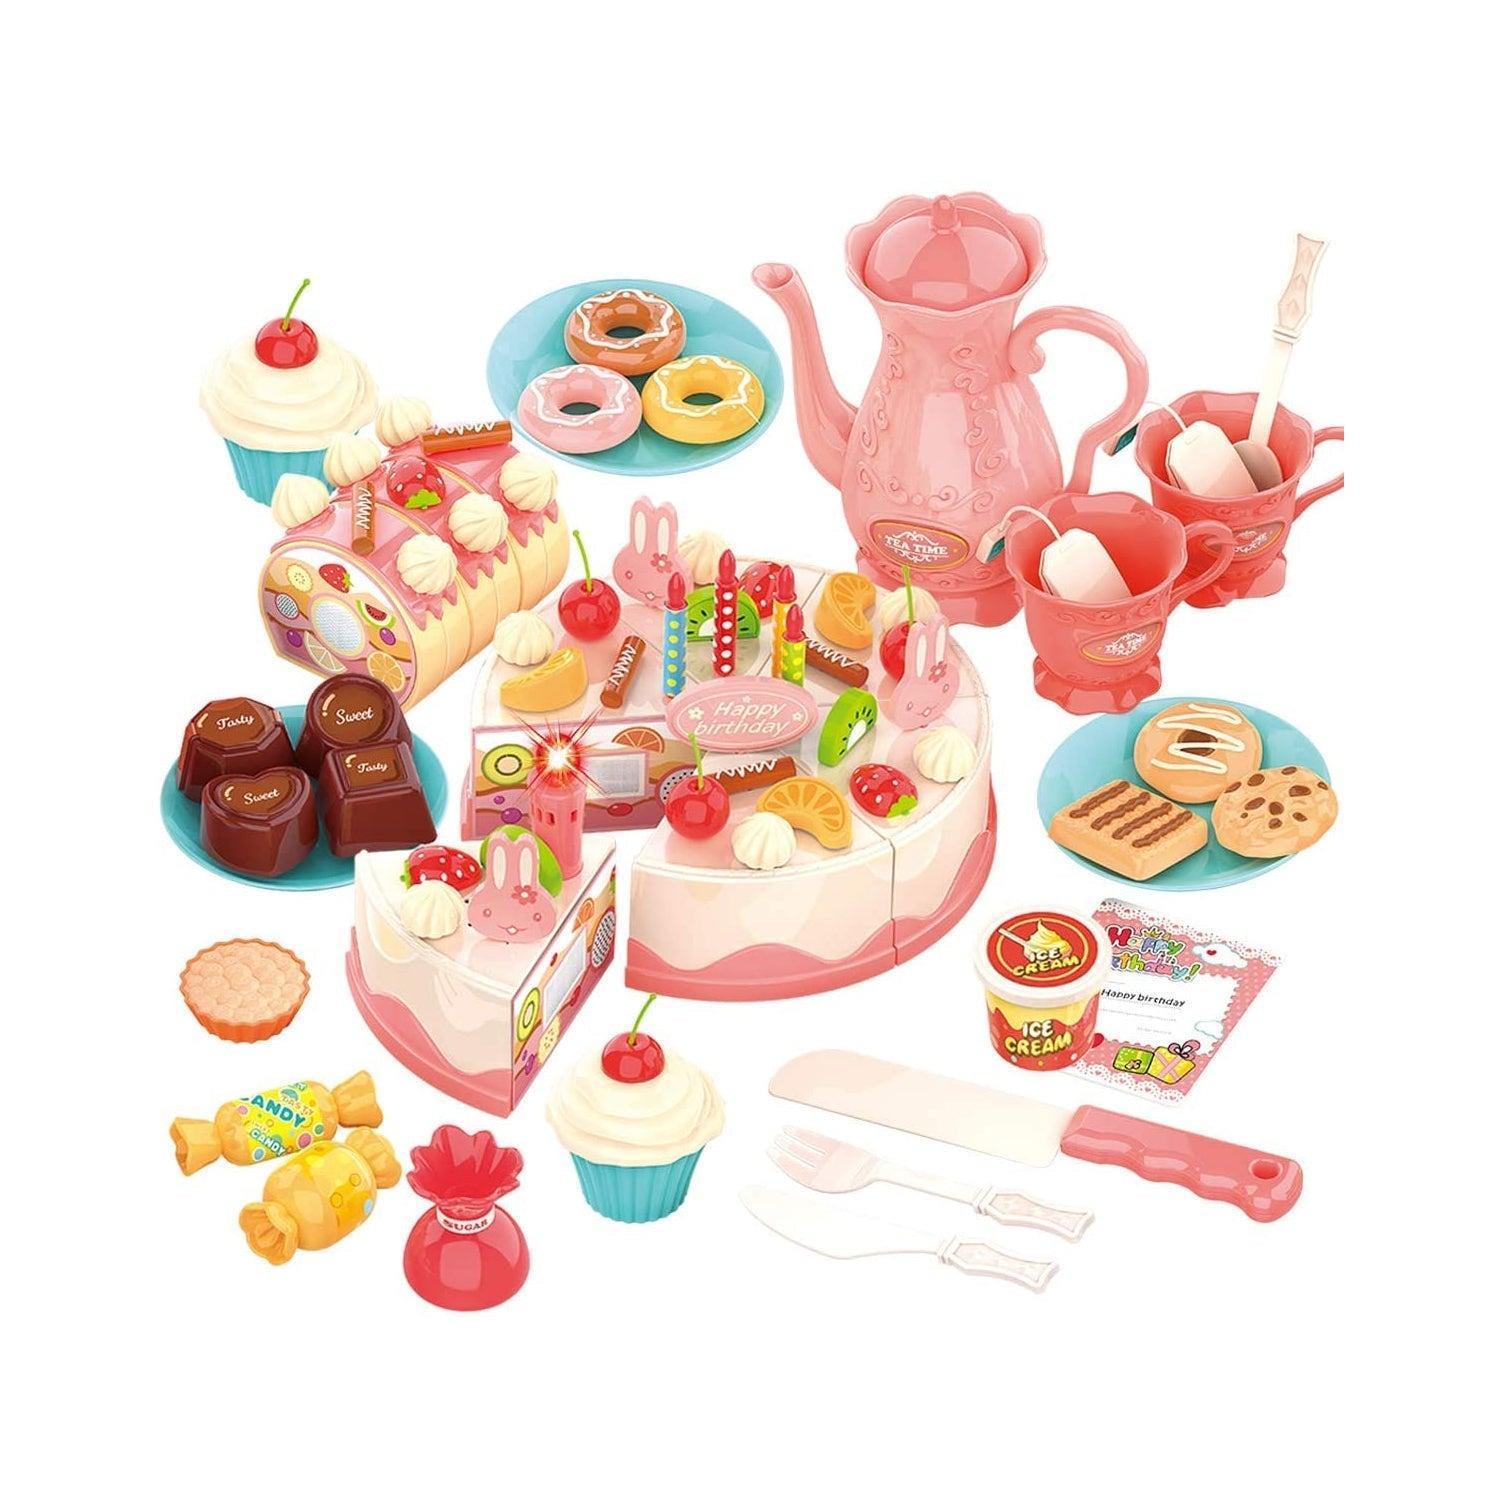 Pretend Play Food for Kids DIY 82PCS Decorating and Cutting Birthday Party Cake